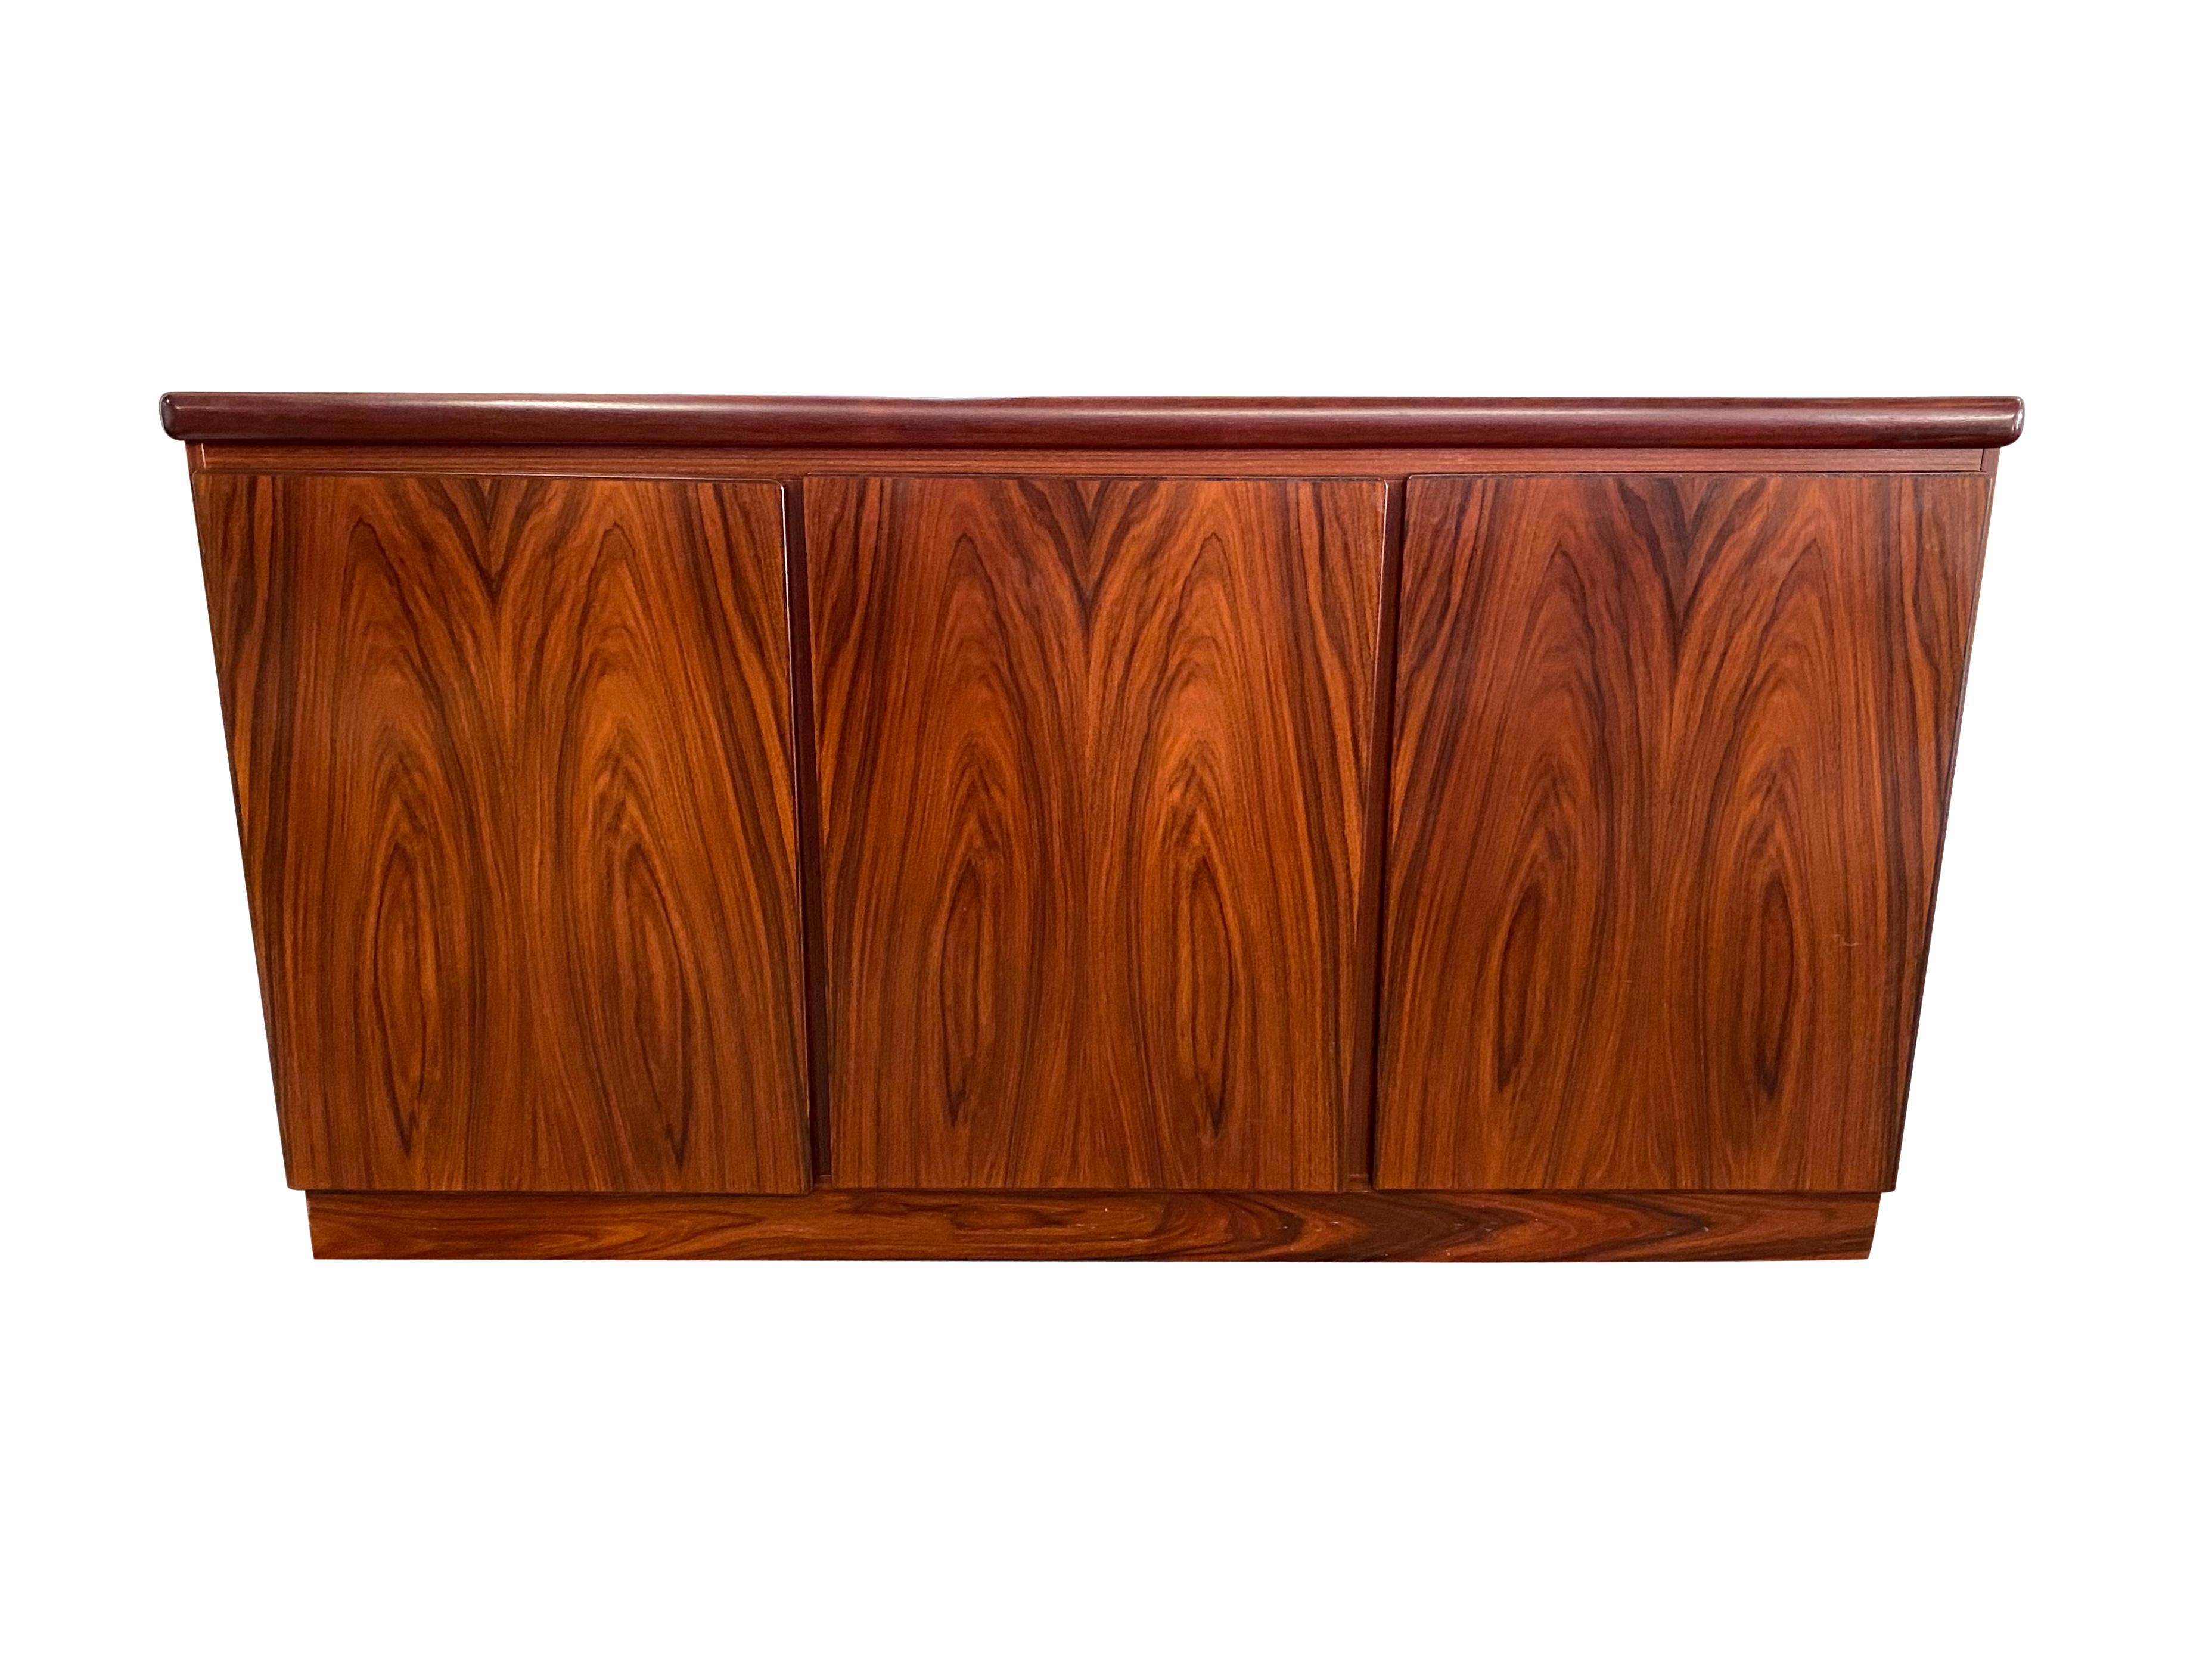 Beautiful Danish modern credenza/buffet/sideboard manufactured by Rasmus Furniture on Denmark. Simple elegant lines frame 3 ample storage compartment, one with drawers. Executed in Brazilian rosewood and featuring stunning color and grain patterns.